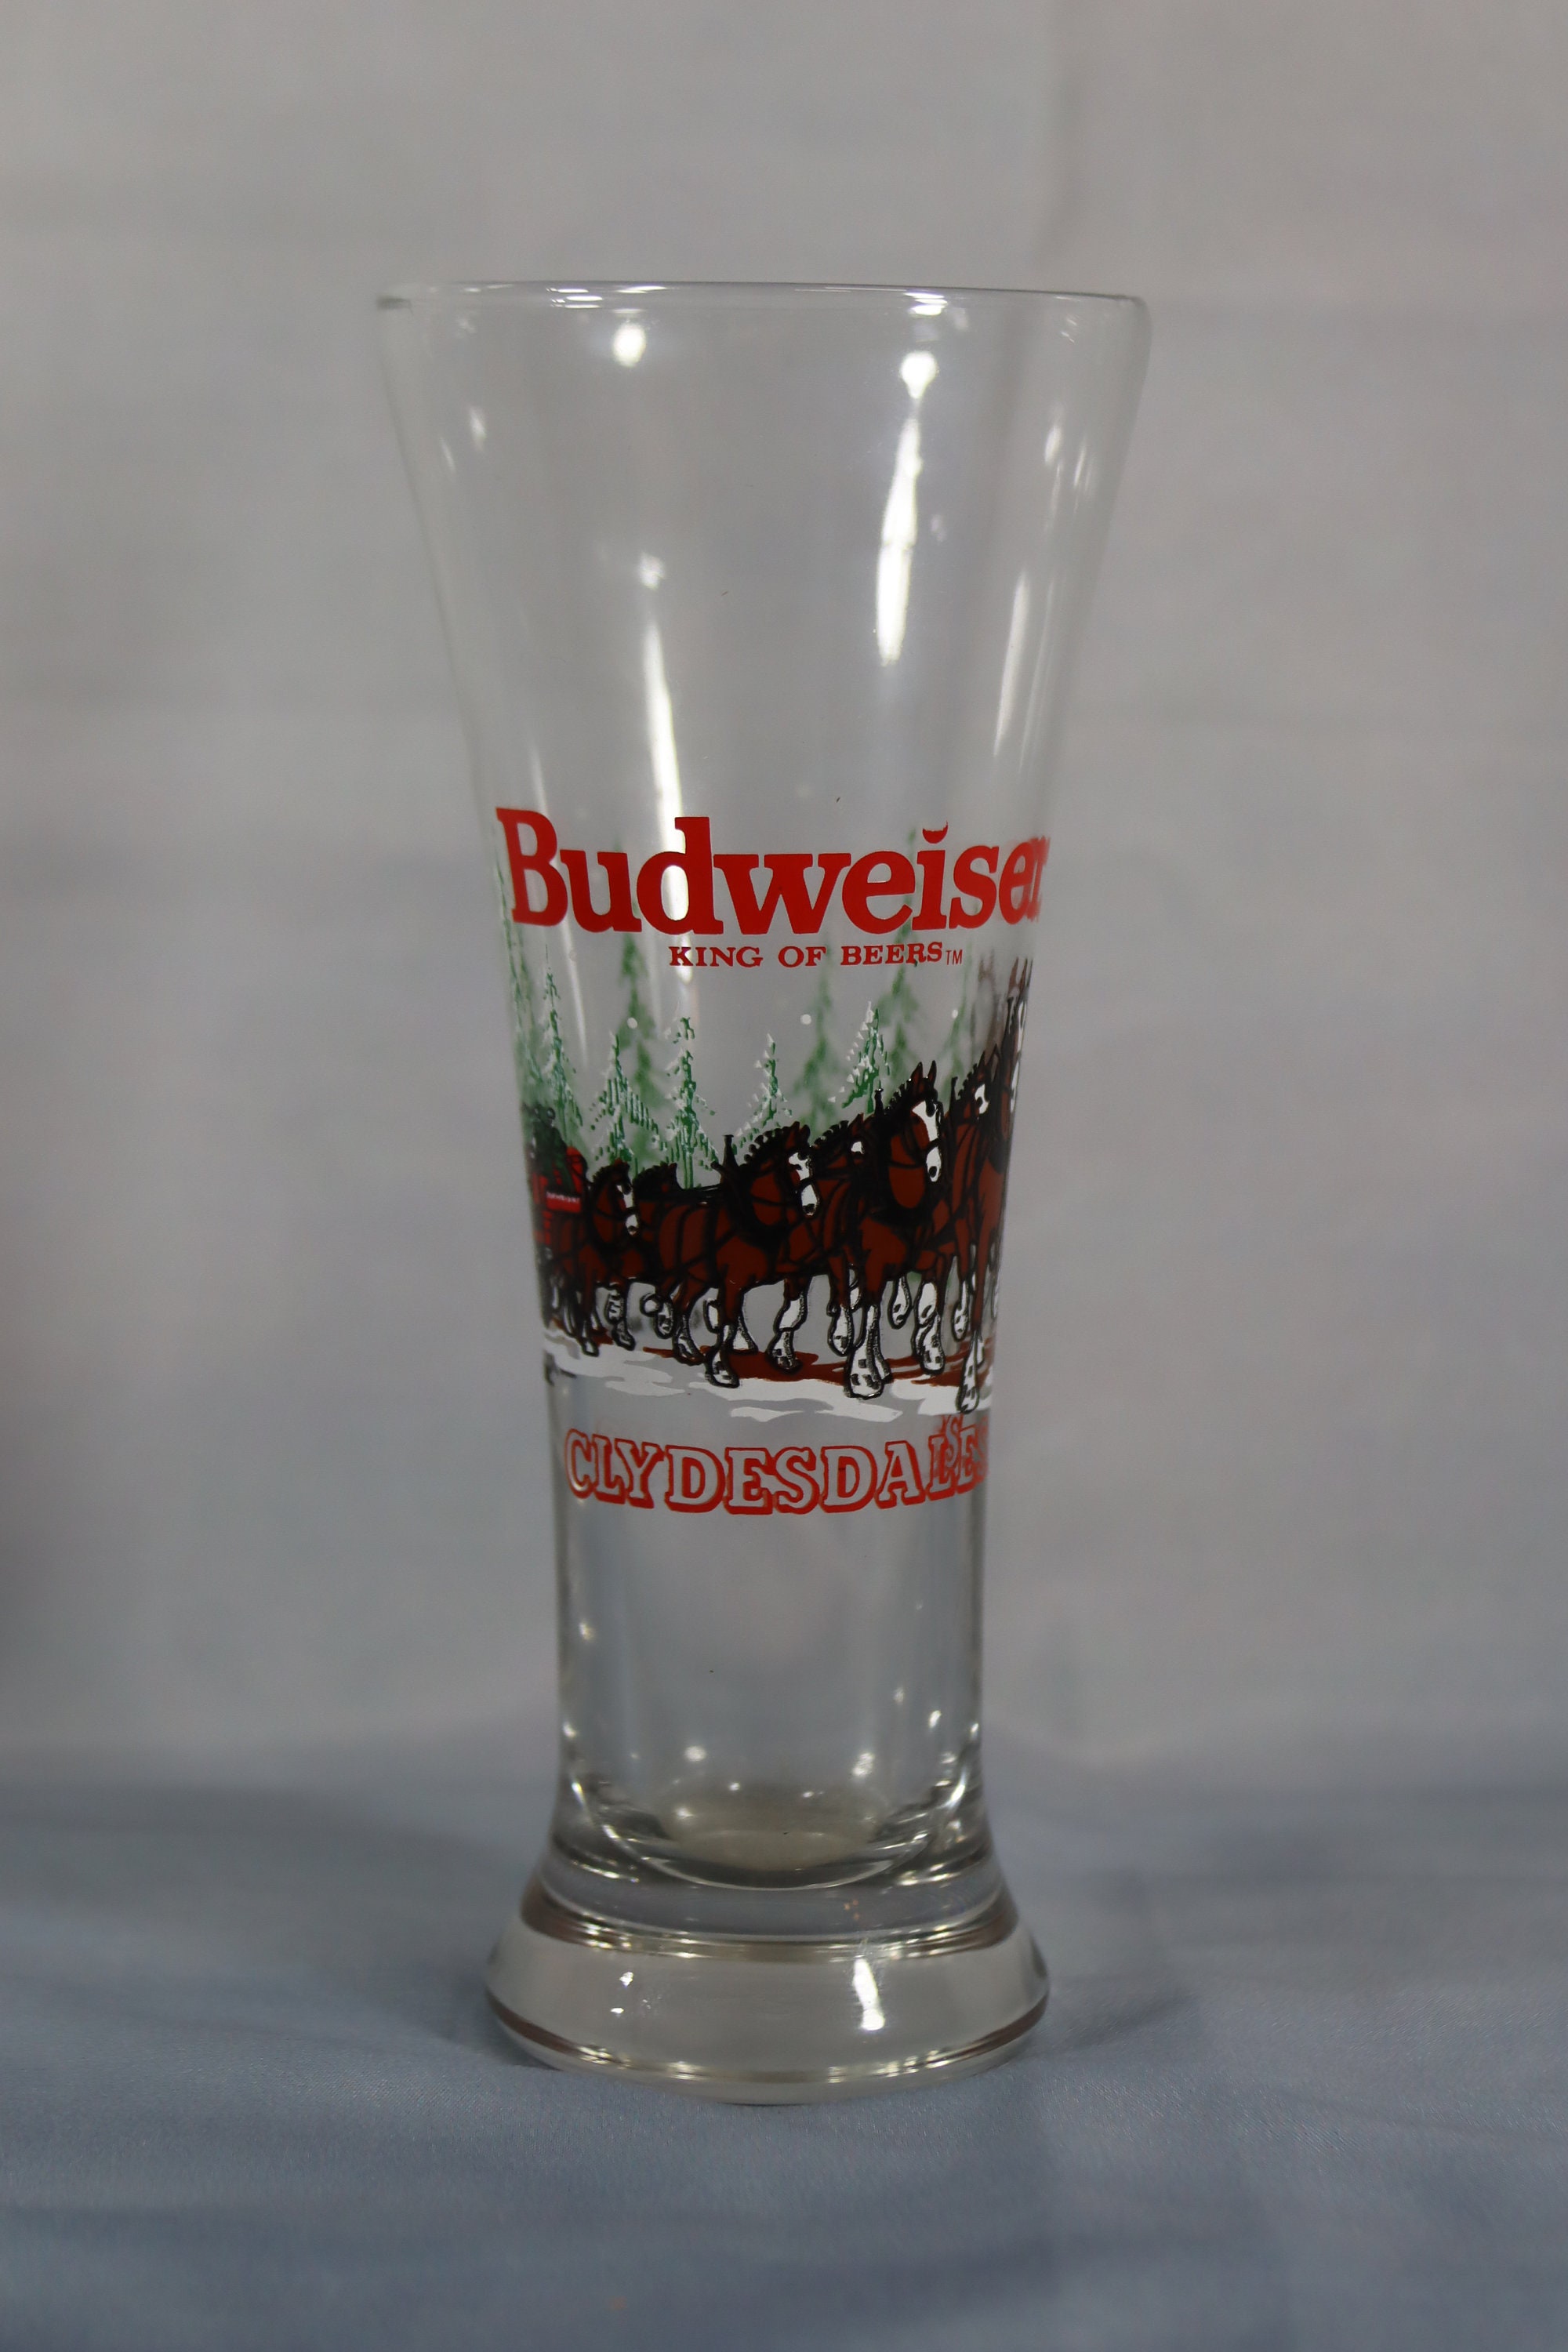 BUDWEISER King of Beers Tall Beer Glass Clydesdales Horses 12 oz